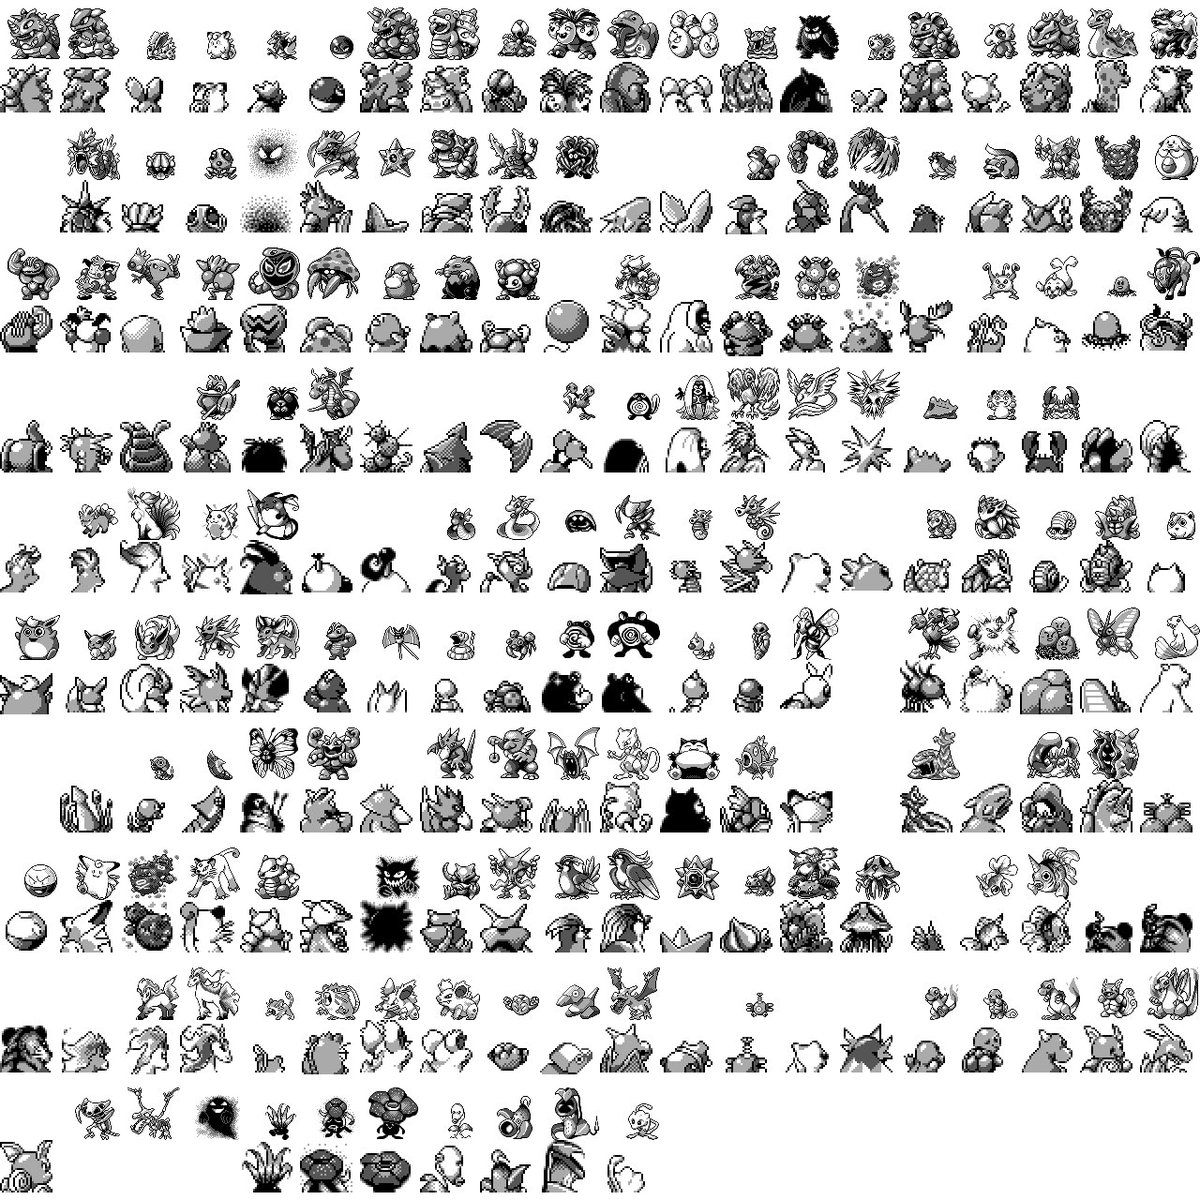 Tahk0 On Twitter Pokemon History Has Just Been Made Helixchamber Has Compiled Released Sprites Sent By A Donor From Gen 1 Beta Capumon There Are New Old Pokemon We Can Finally